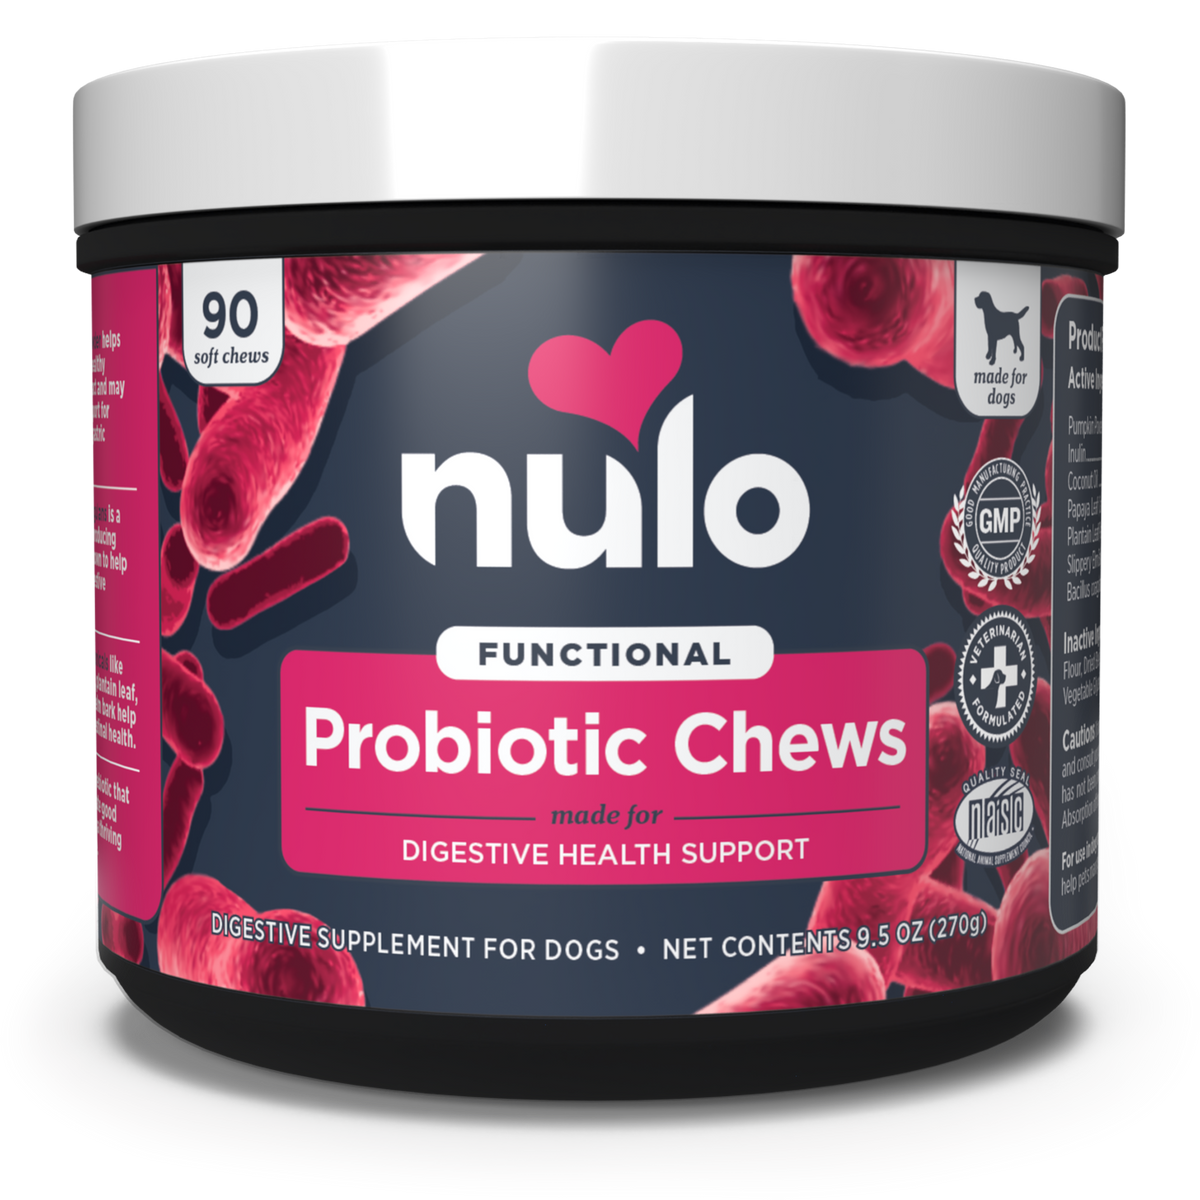 Nulo Functional Chews 90 count - Dog